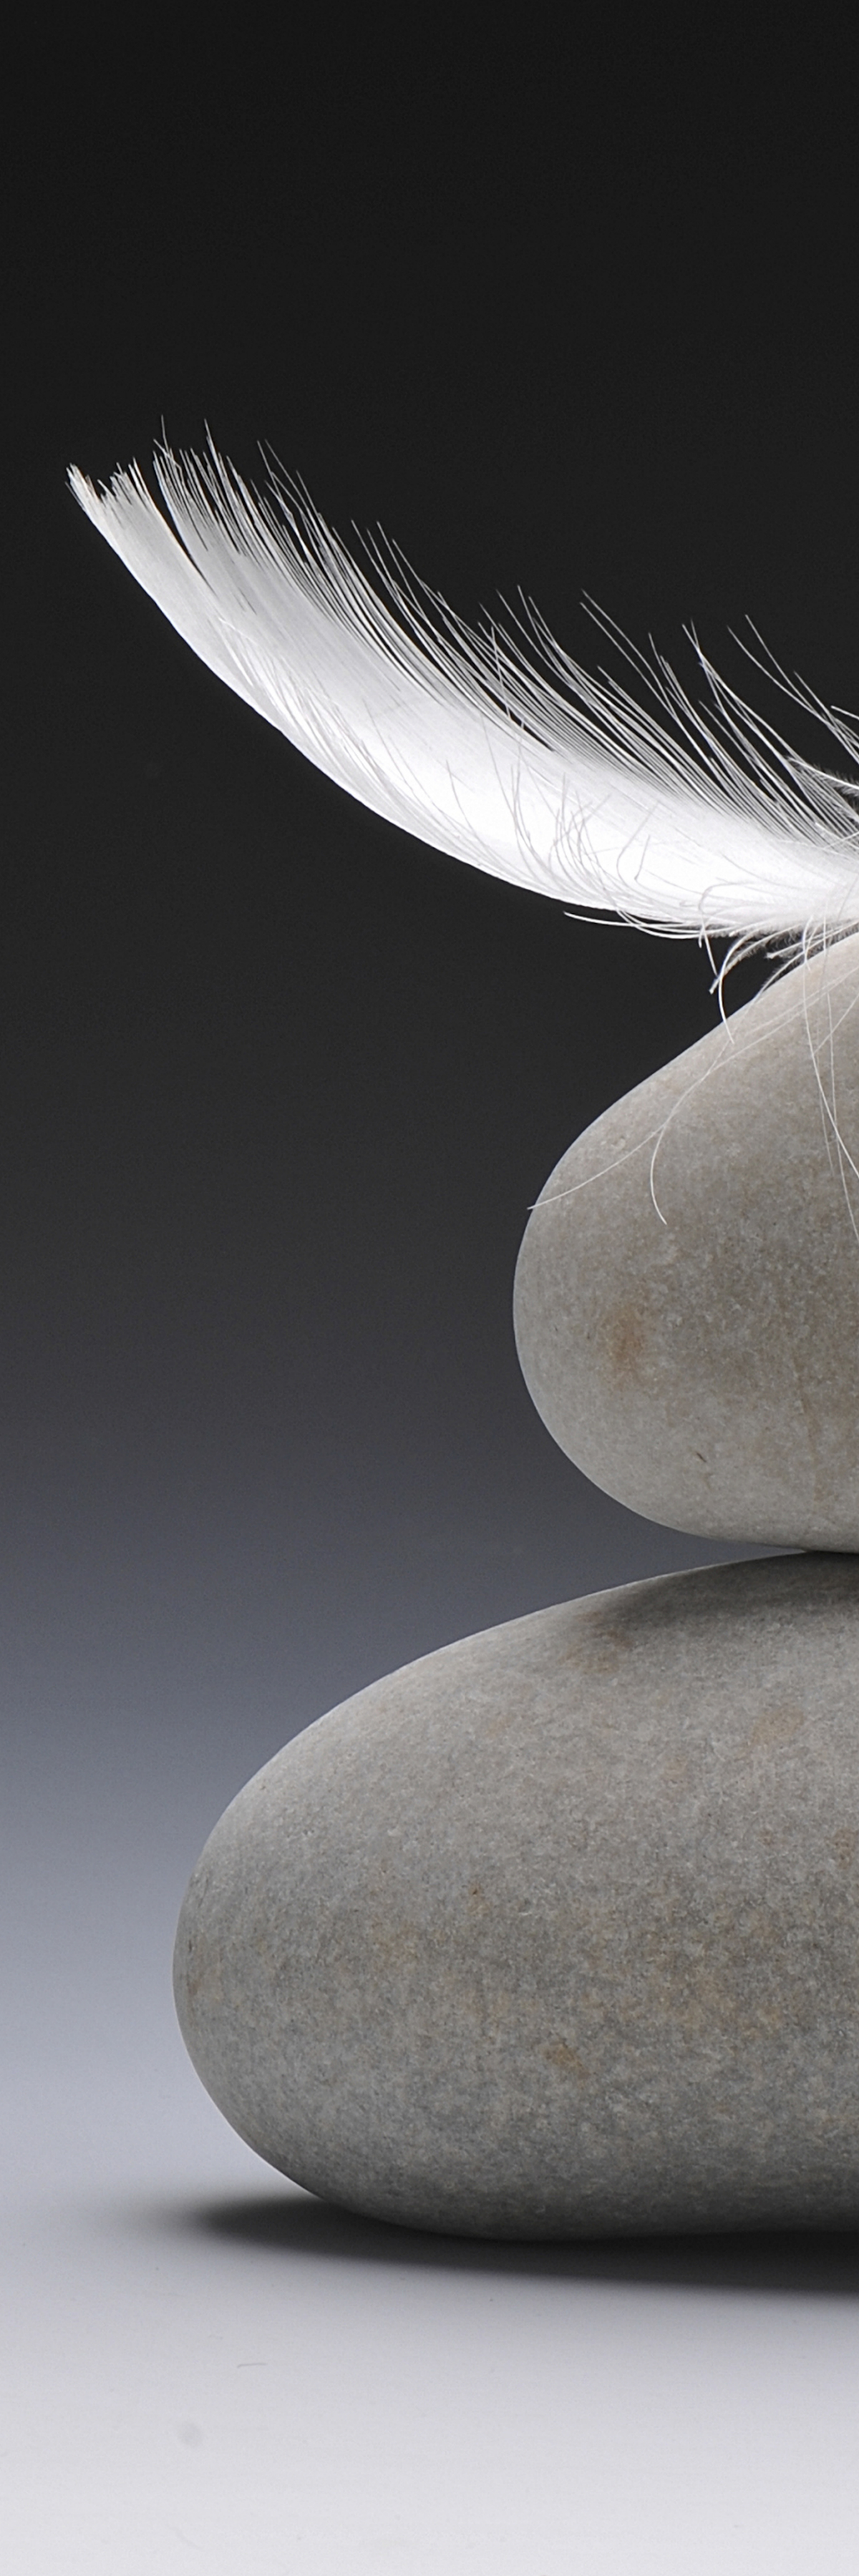 Zen Stones with a Feather